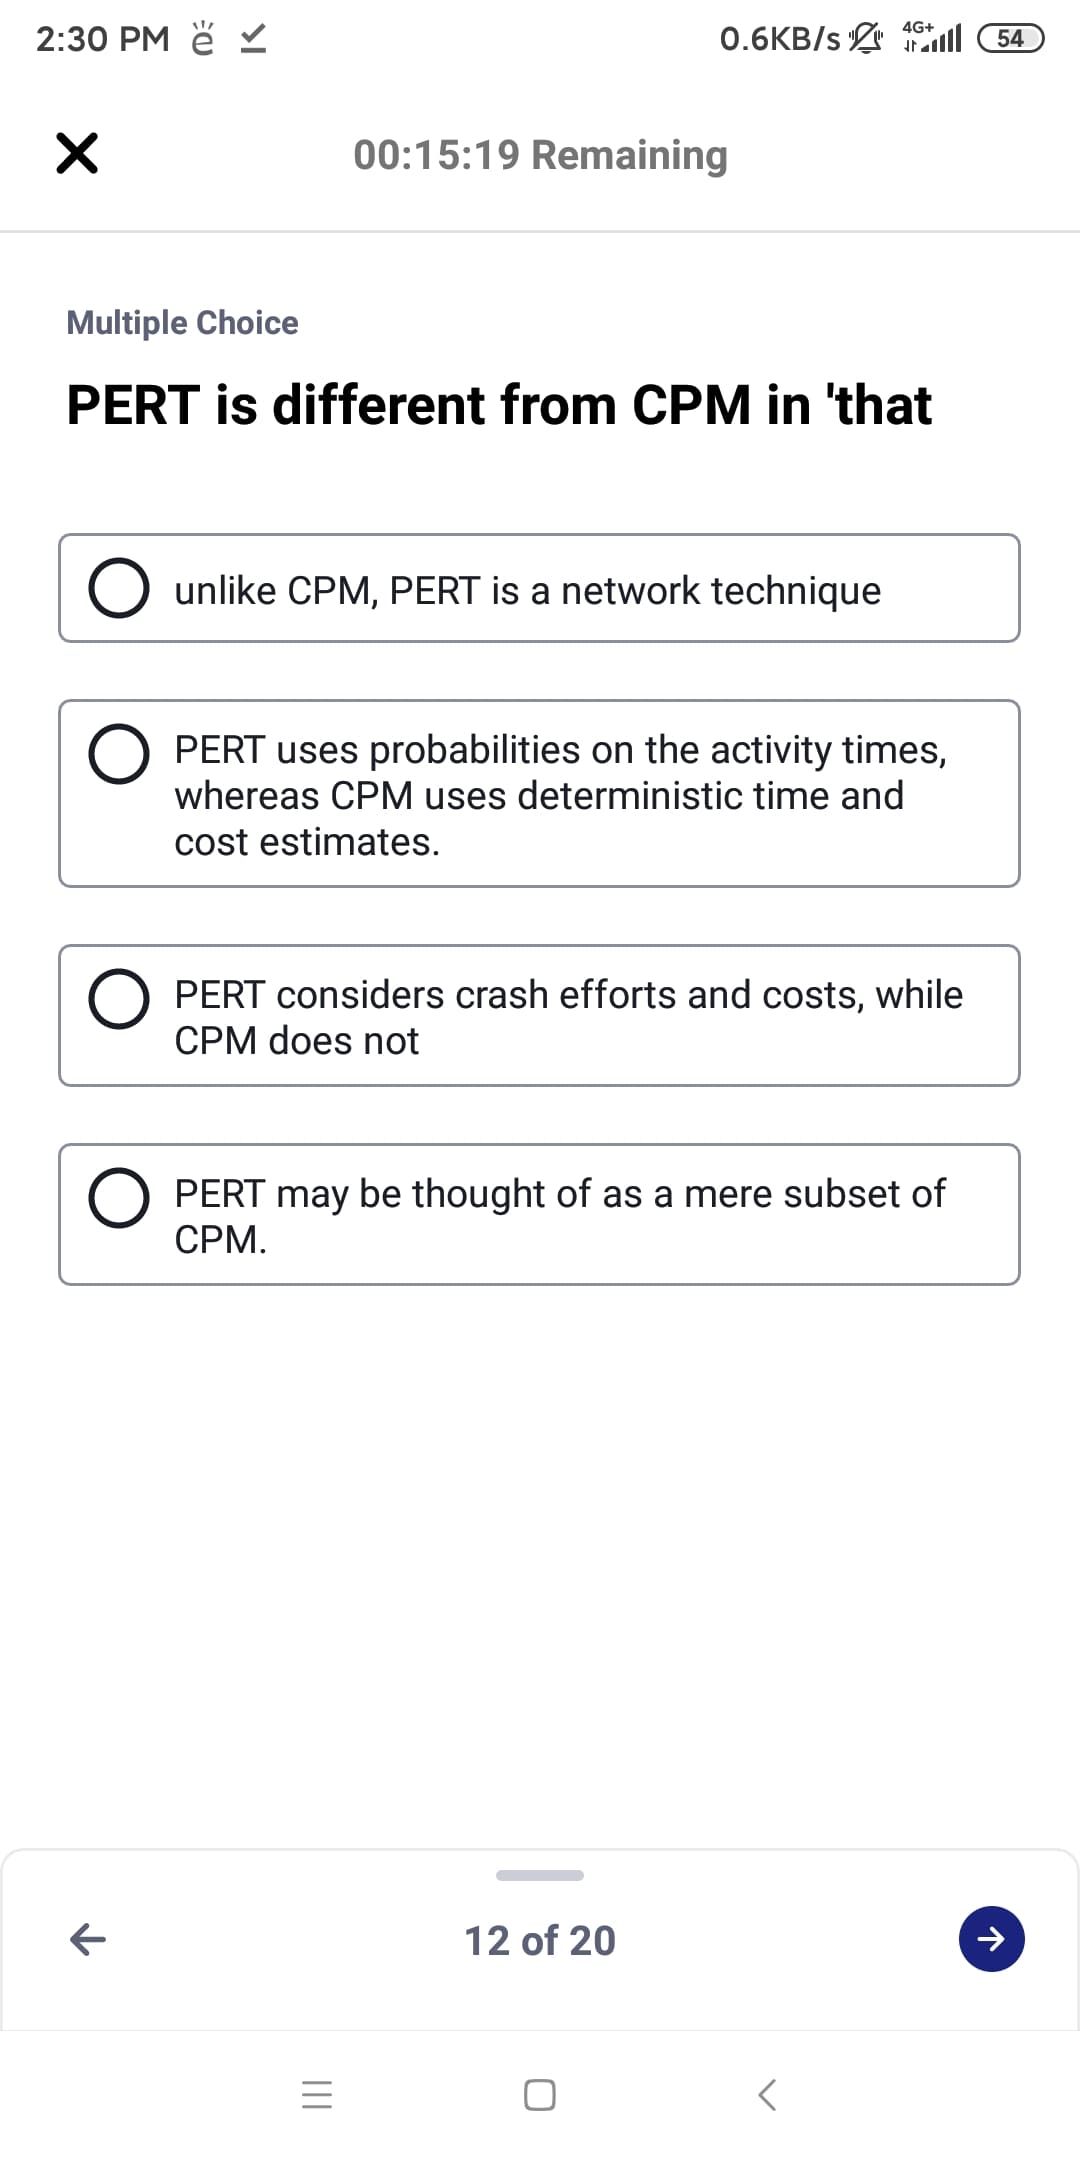 2:30 PM ě
4G+
0.6KB/s l 54
00:15:19 Remaining
Multiple Choice
PERT is different from CPM in 'that
unlike CPM, PERT is a network technique
PERT uses probabilities on the activity times,
whereas CPM uses deterministic time and
cost estimates.
PERT considers crash efforts and costs, while
CPM does not
PERT may be thought of as a mere subset of
CPM.
12 of 20
